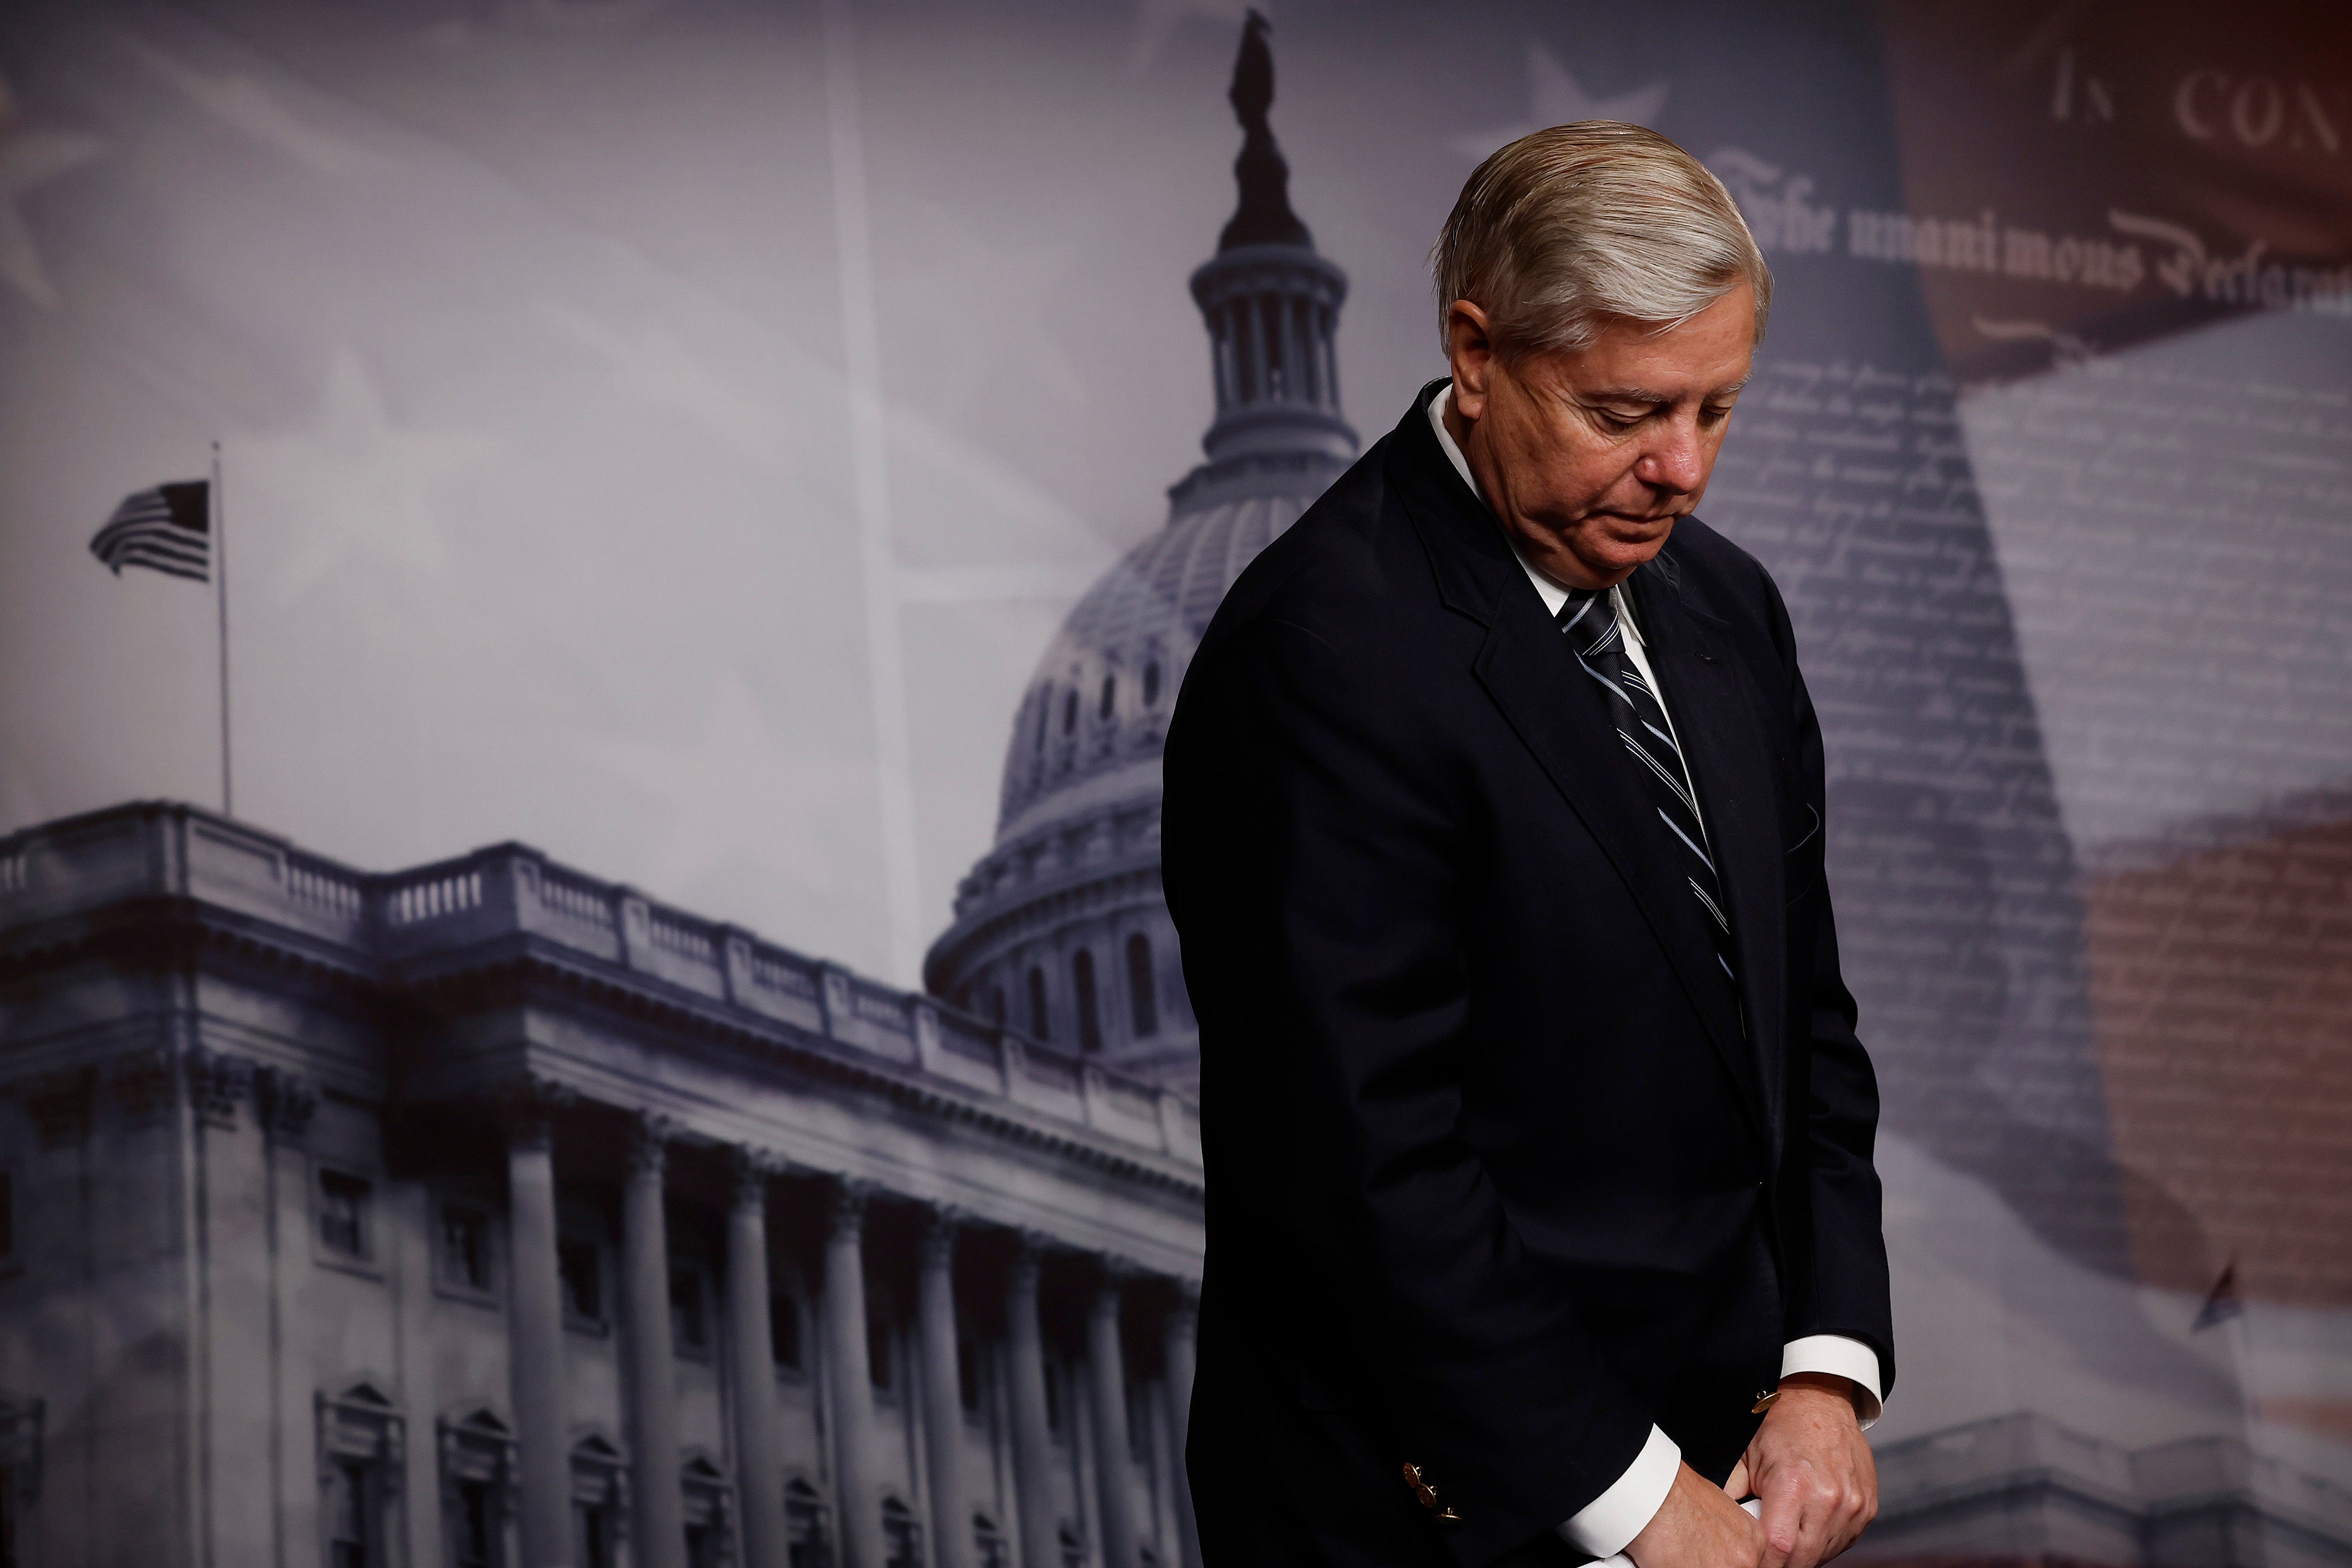 South Carolina Sen. Lindsey Graham during a February news conference. (Photo: Chip Somodevilla, Getty Images)